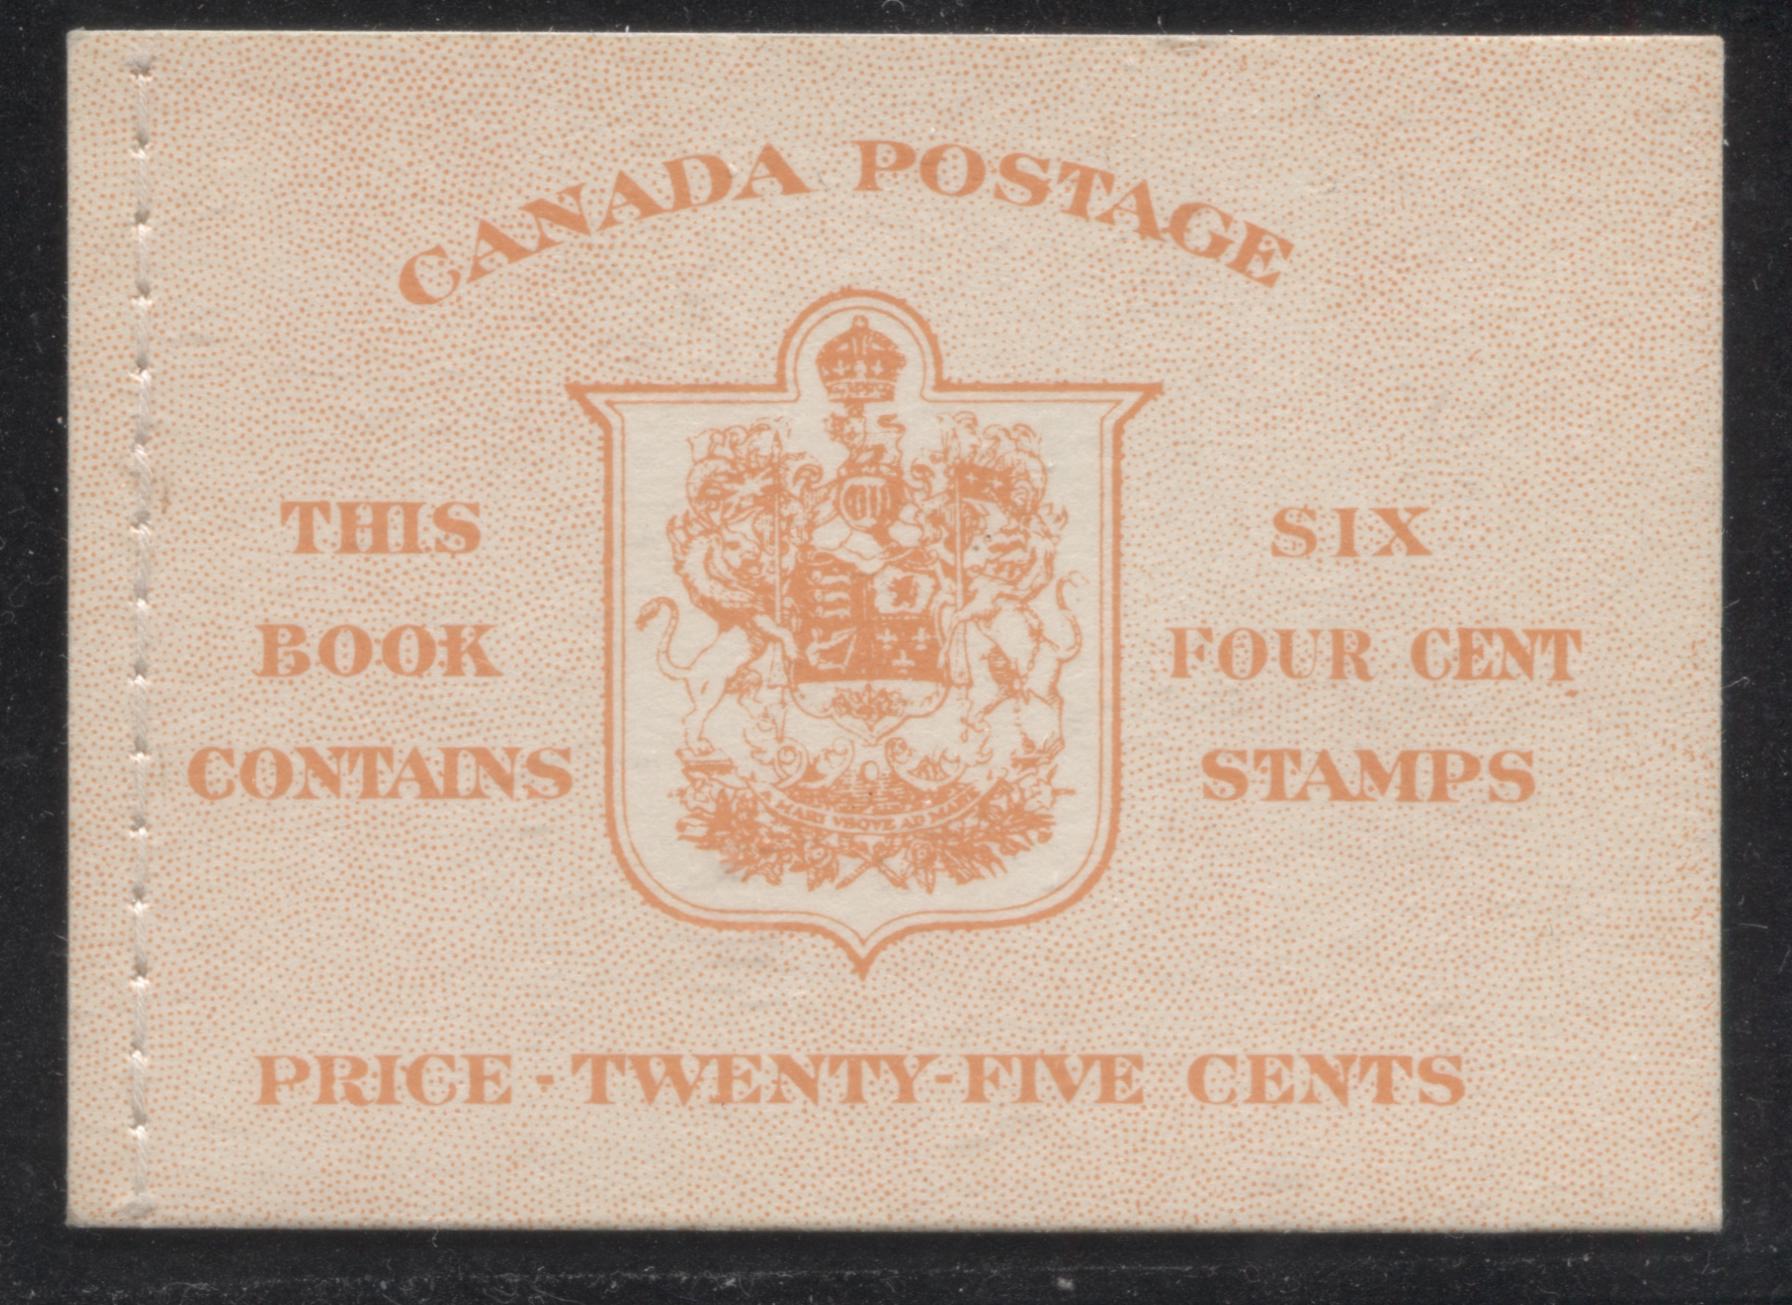 Canada #BK42b 1949-1953 Postes-Postage Issue Complete 25c, English Booklet Containing 1 Pane of 6 of the 4c Orange King George VI Harris Front Cover Type IIi , Back Cover Eii, No Rate Page, Stitched Binding Brixton Chrome 